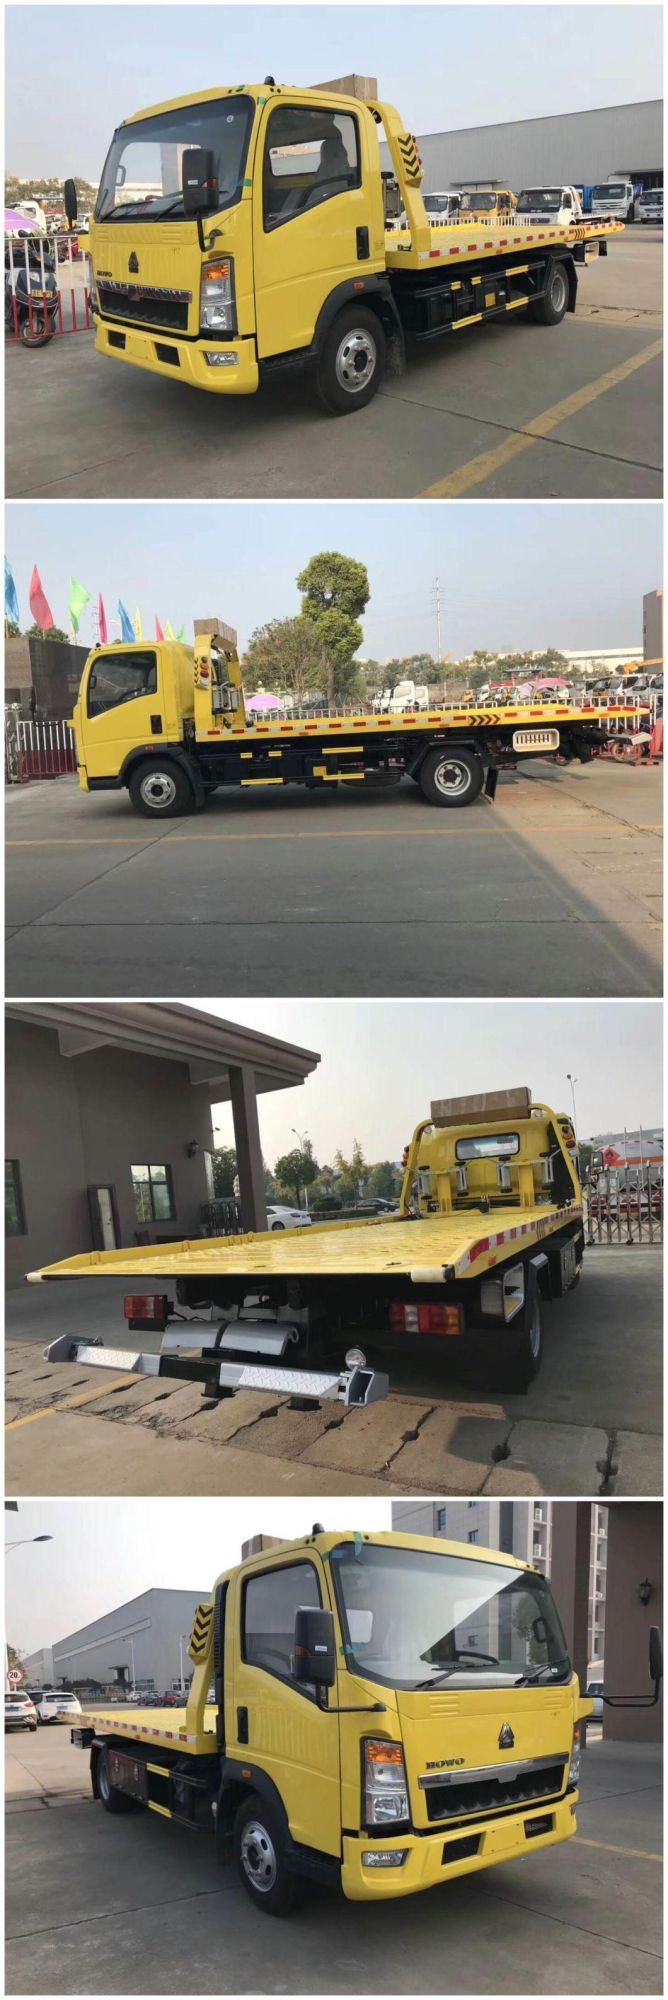 2018 Hot Sell Dongfeng 5tons Flatbed Road Wrecker Trucks Price